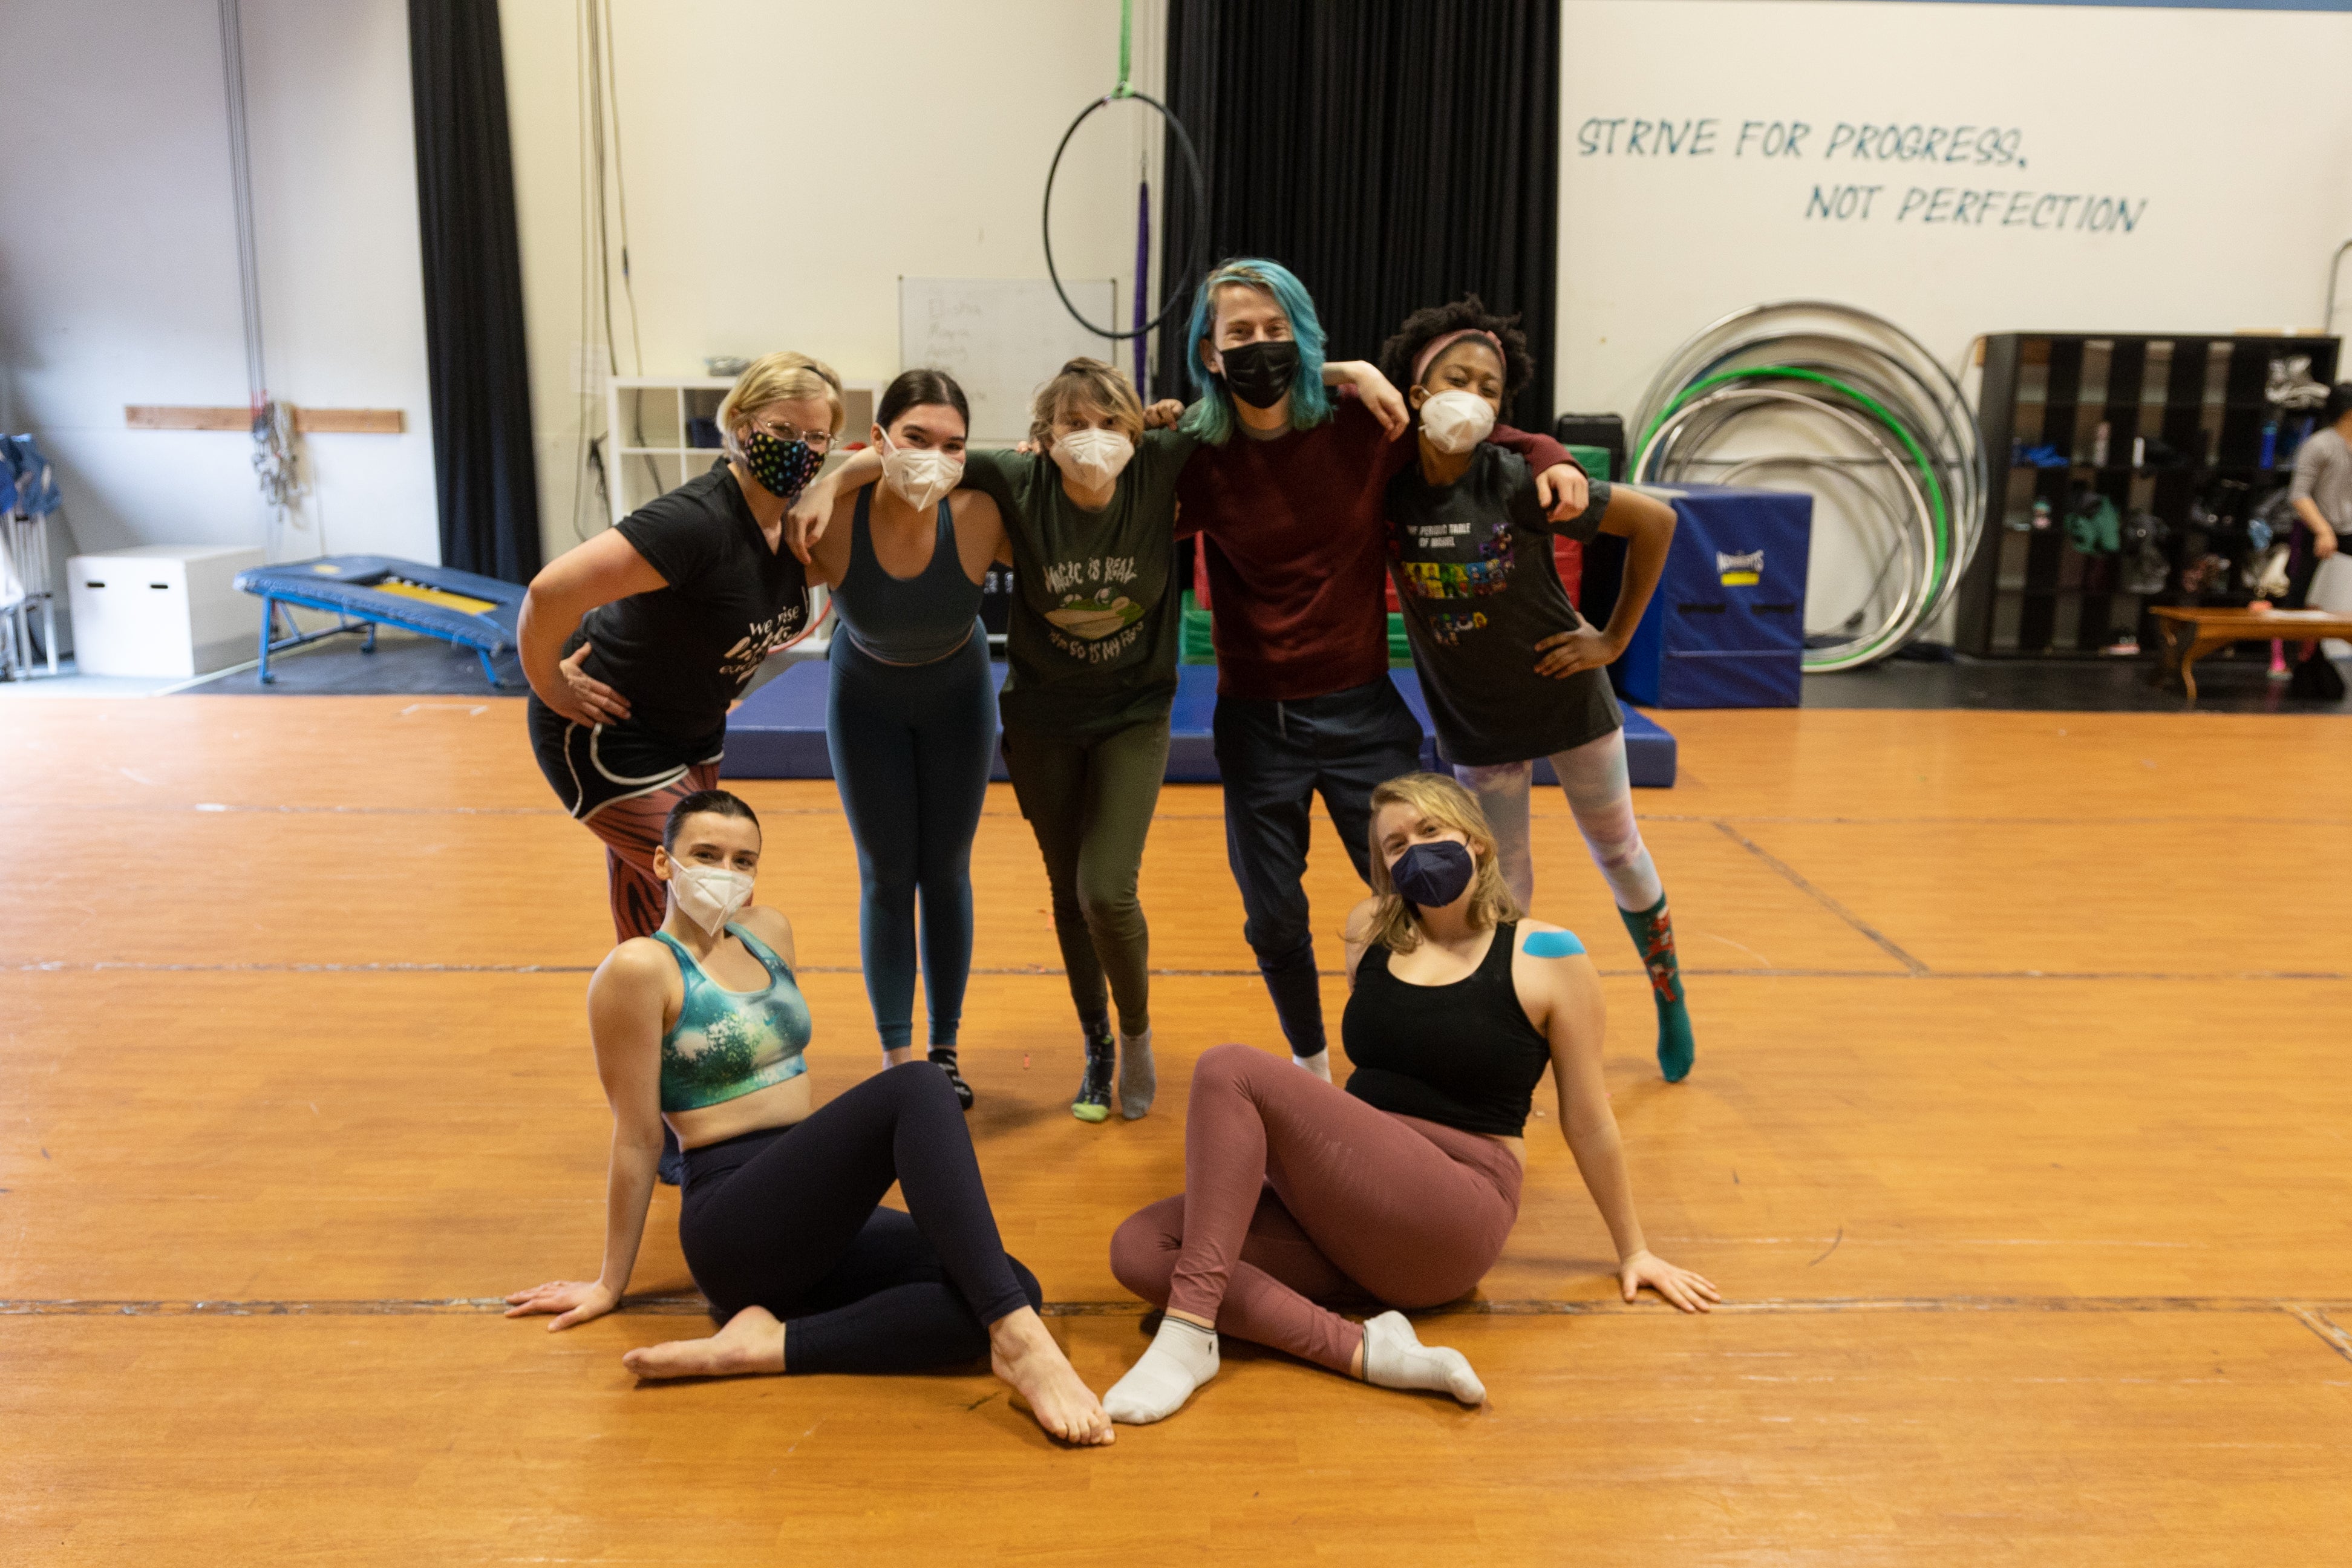 Seven people pose for a picture inside the Seattle School of Acrobatics and New Circus Arts.